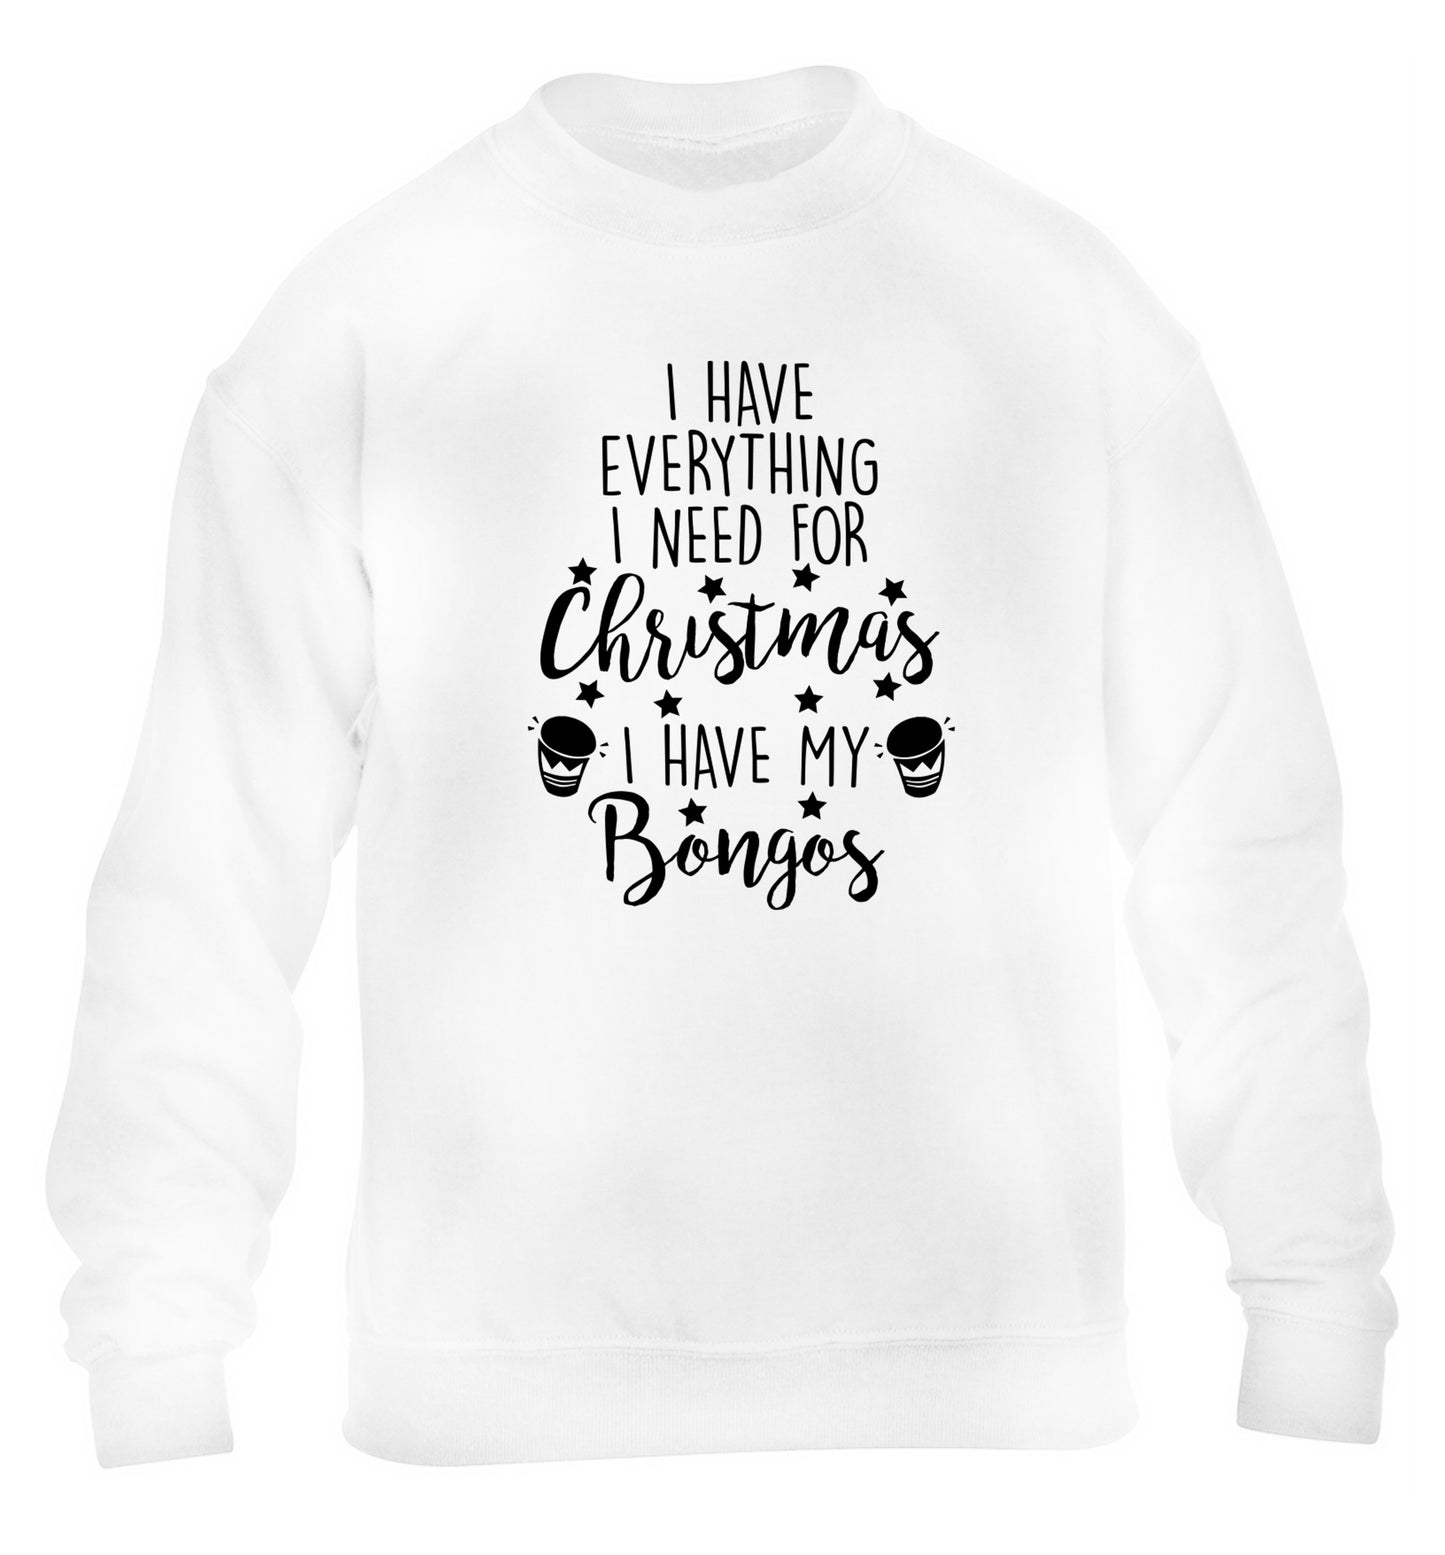 I have everything I need for Christmas I have my bongos! children's white sweater 12-14 Years